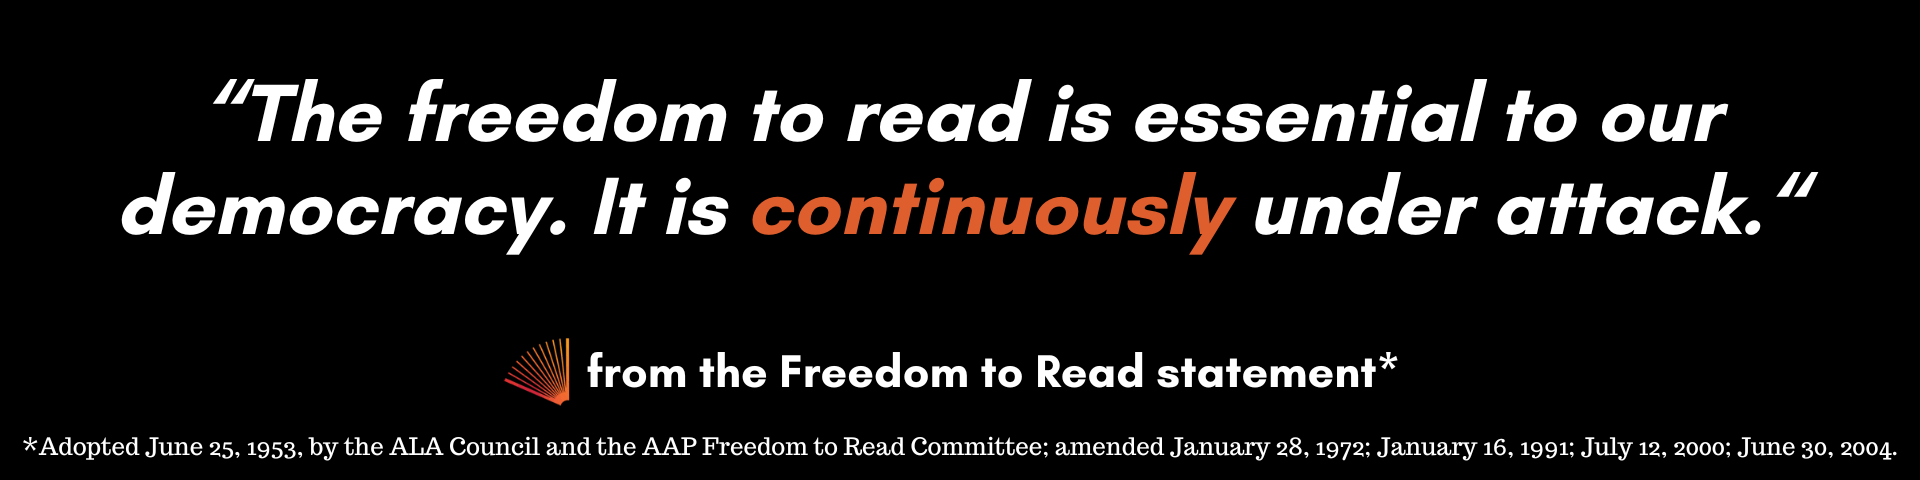 "The freedom to read is essential to our democracy. It is continuously under attack." from the Freedom to Read Statement of 1953